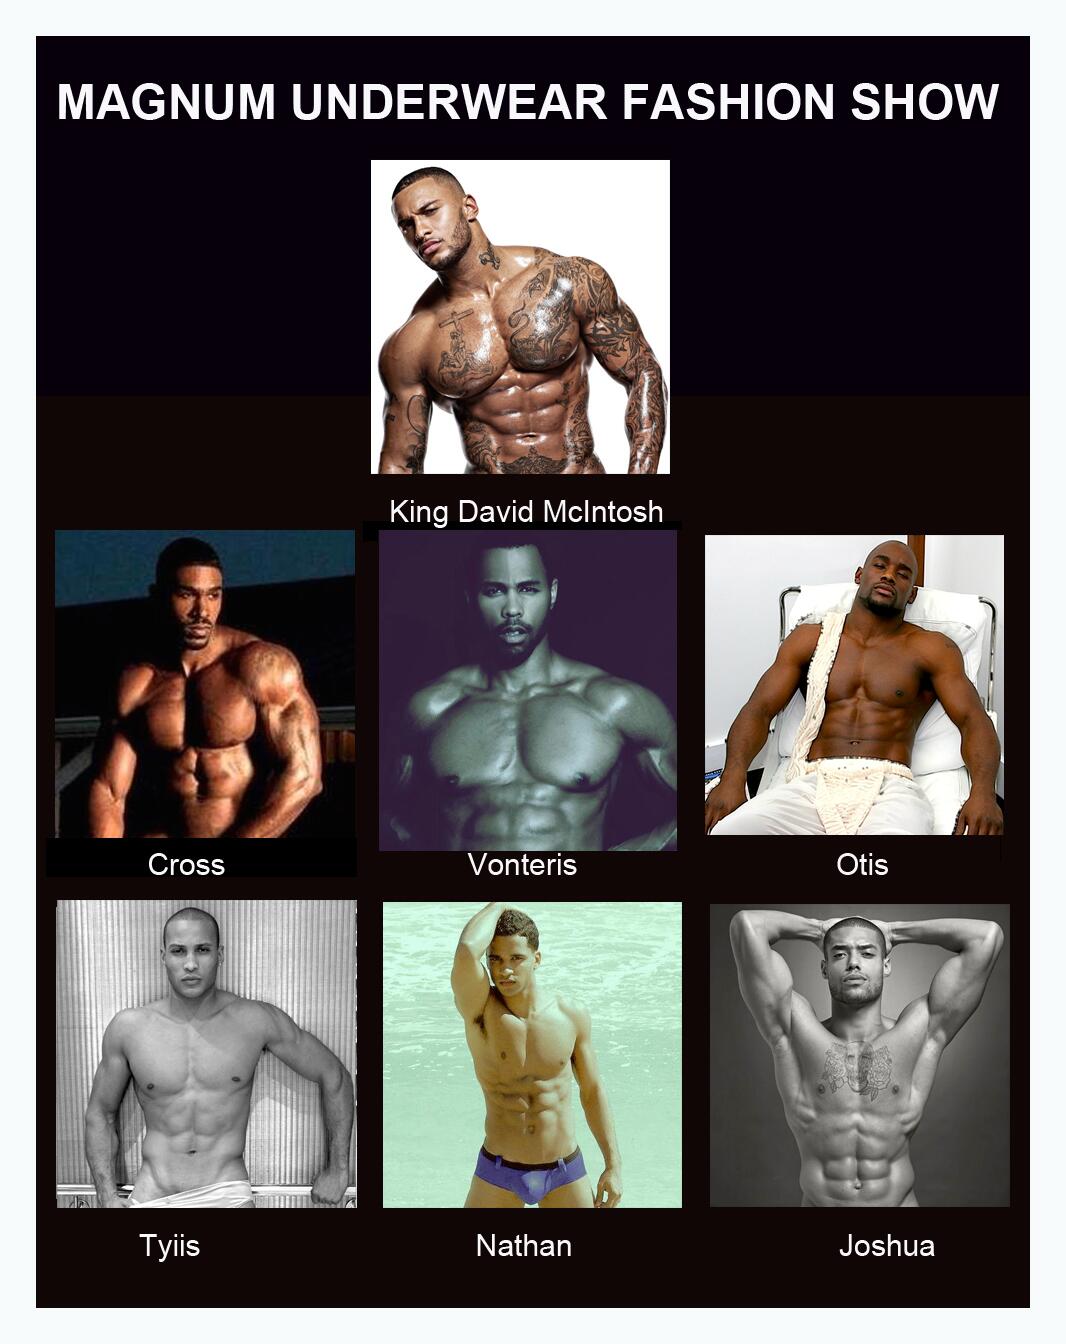 DC FASHION WEEK on X: The model line up for the Magnum Underwear